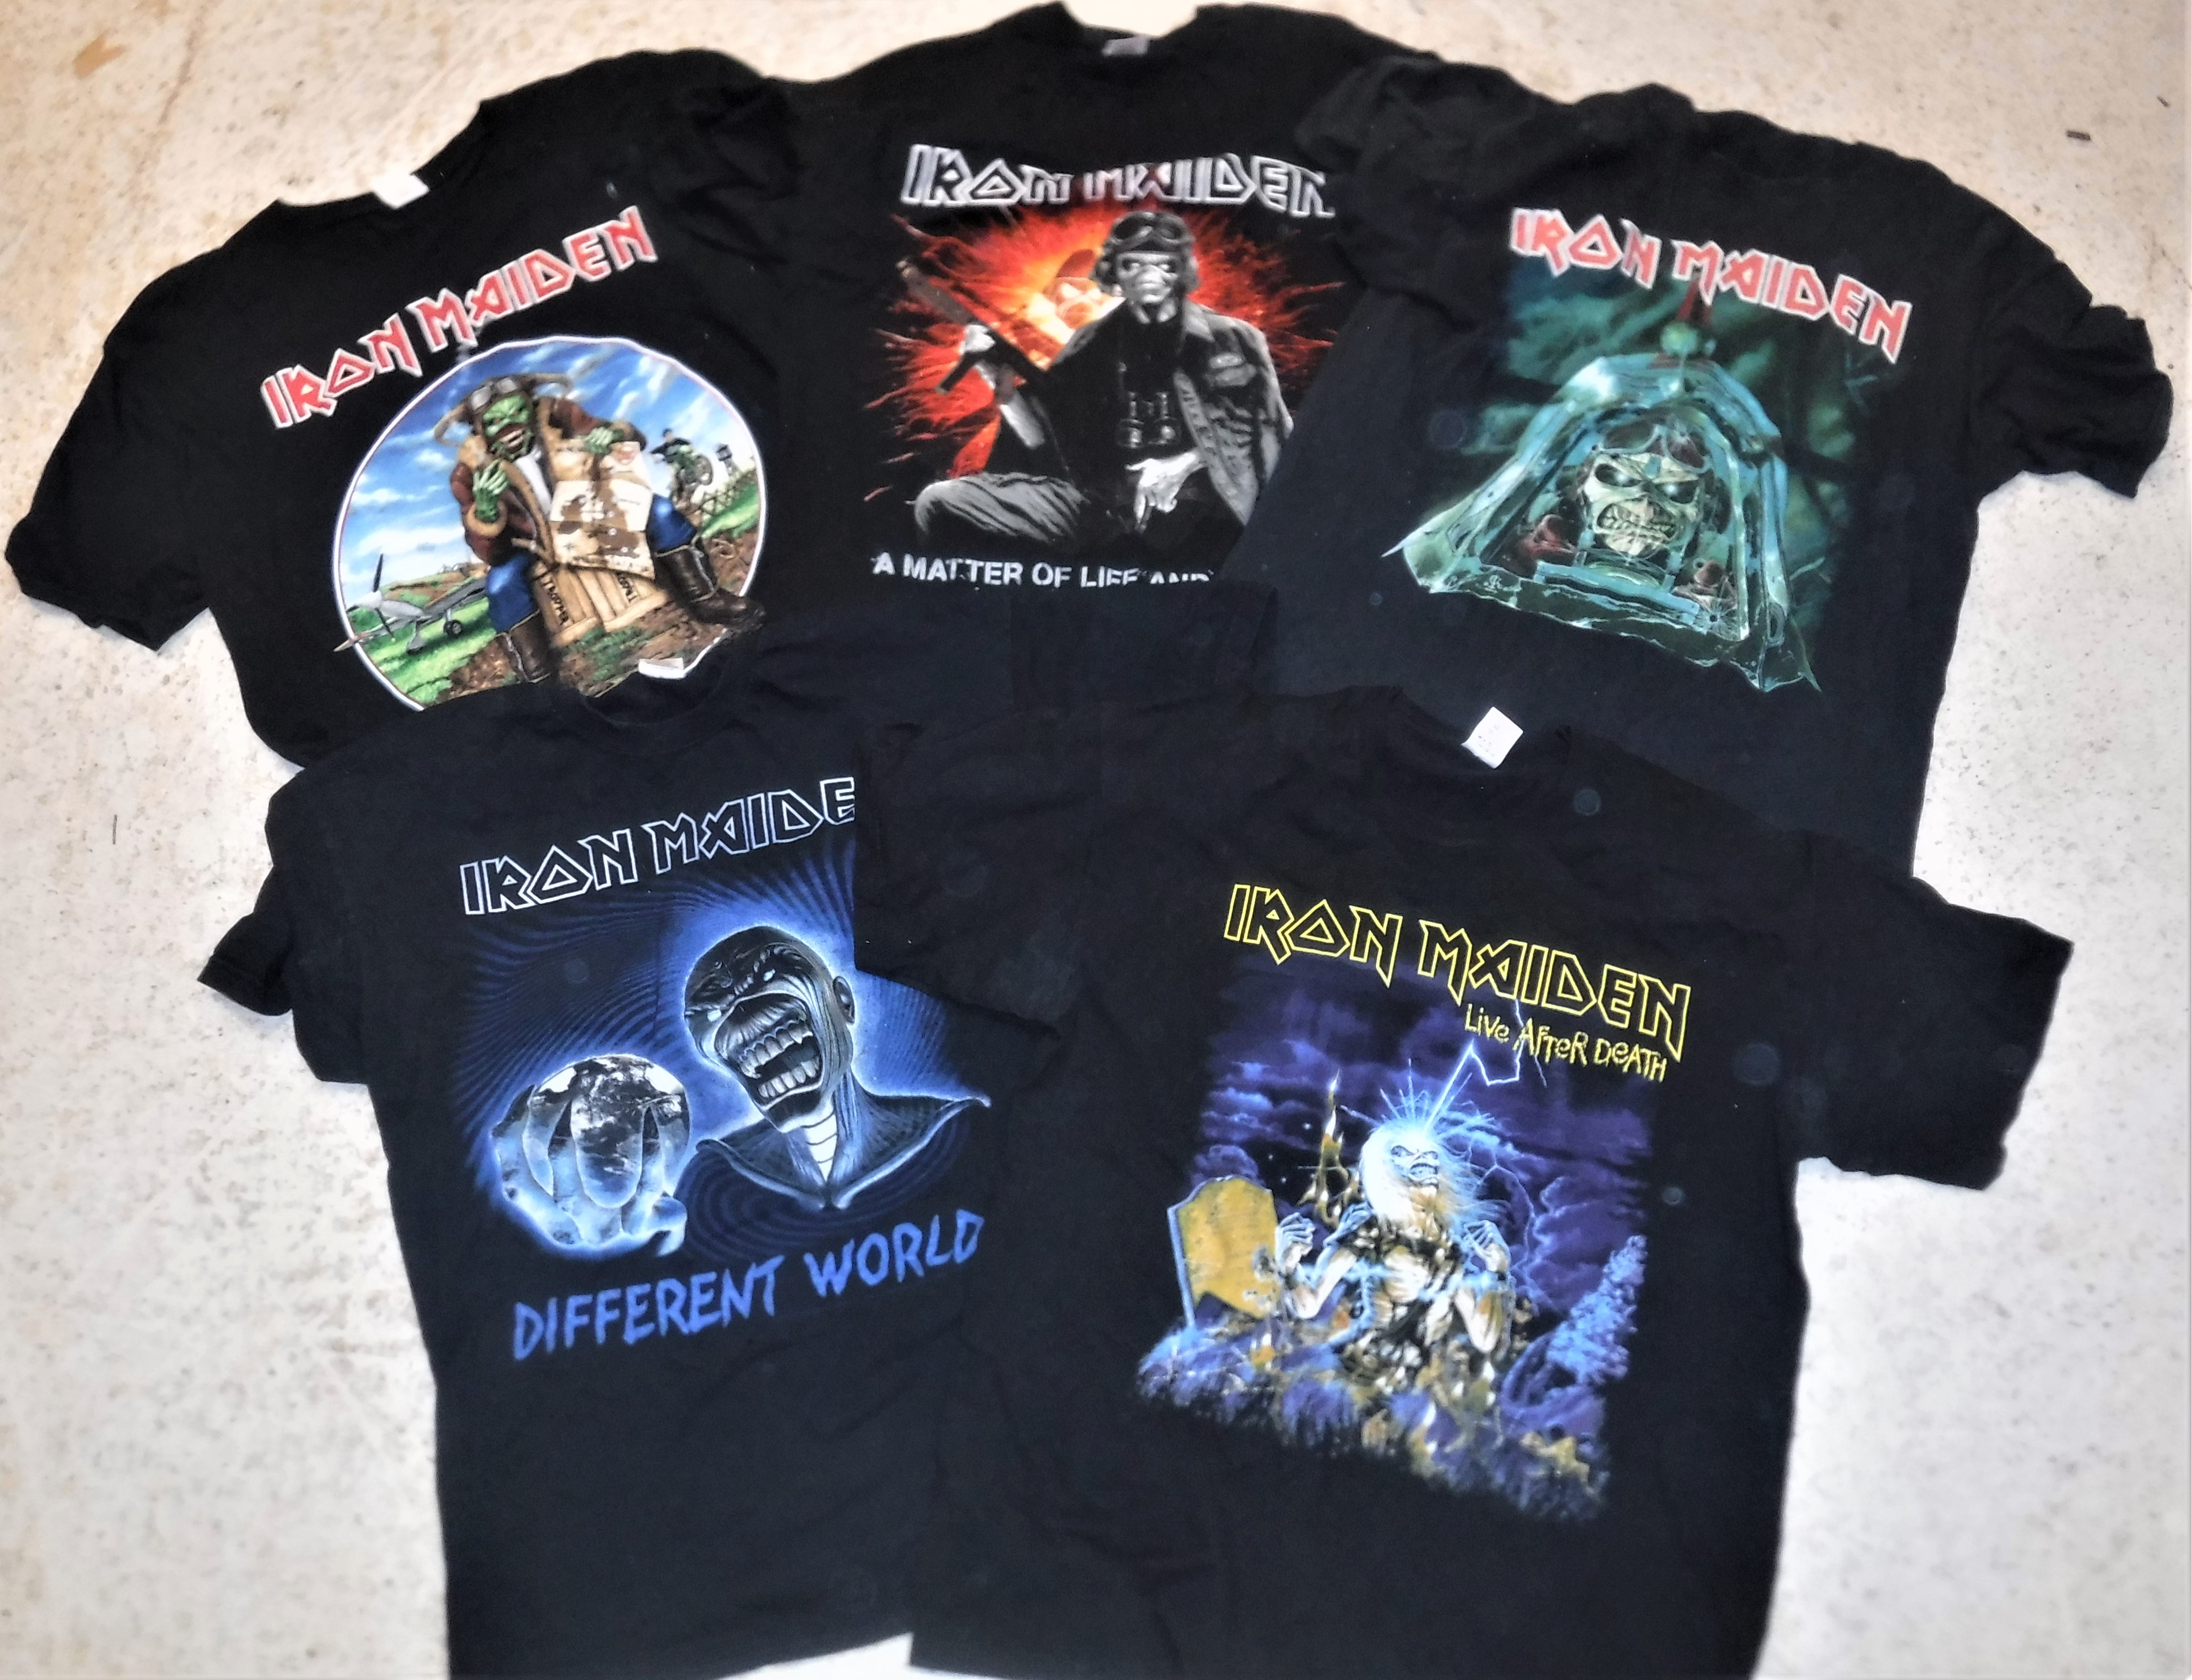 Five various IRON MAIDEN tour t-shirts including "666 Squadron", "Operation L.O.T.